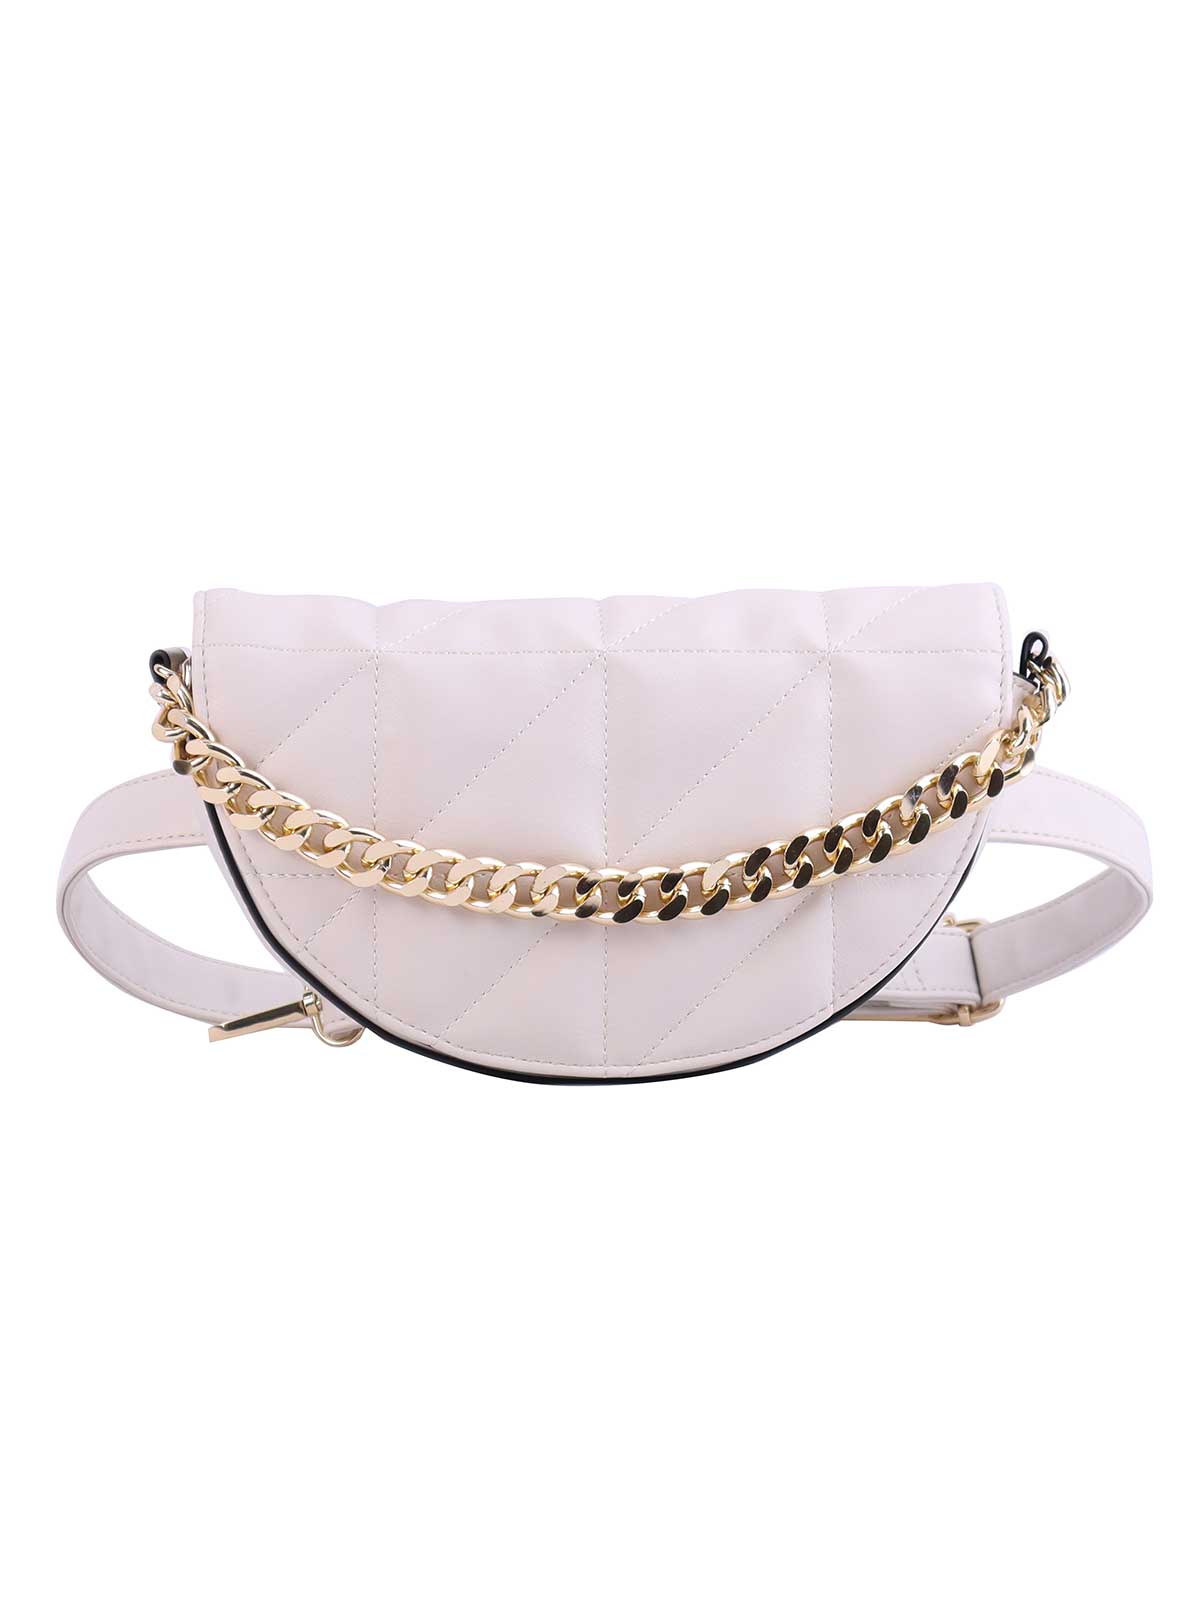 CHANEL Caviar Quilted Belt Bag White 650327